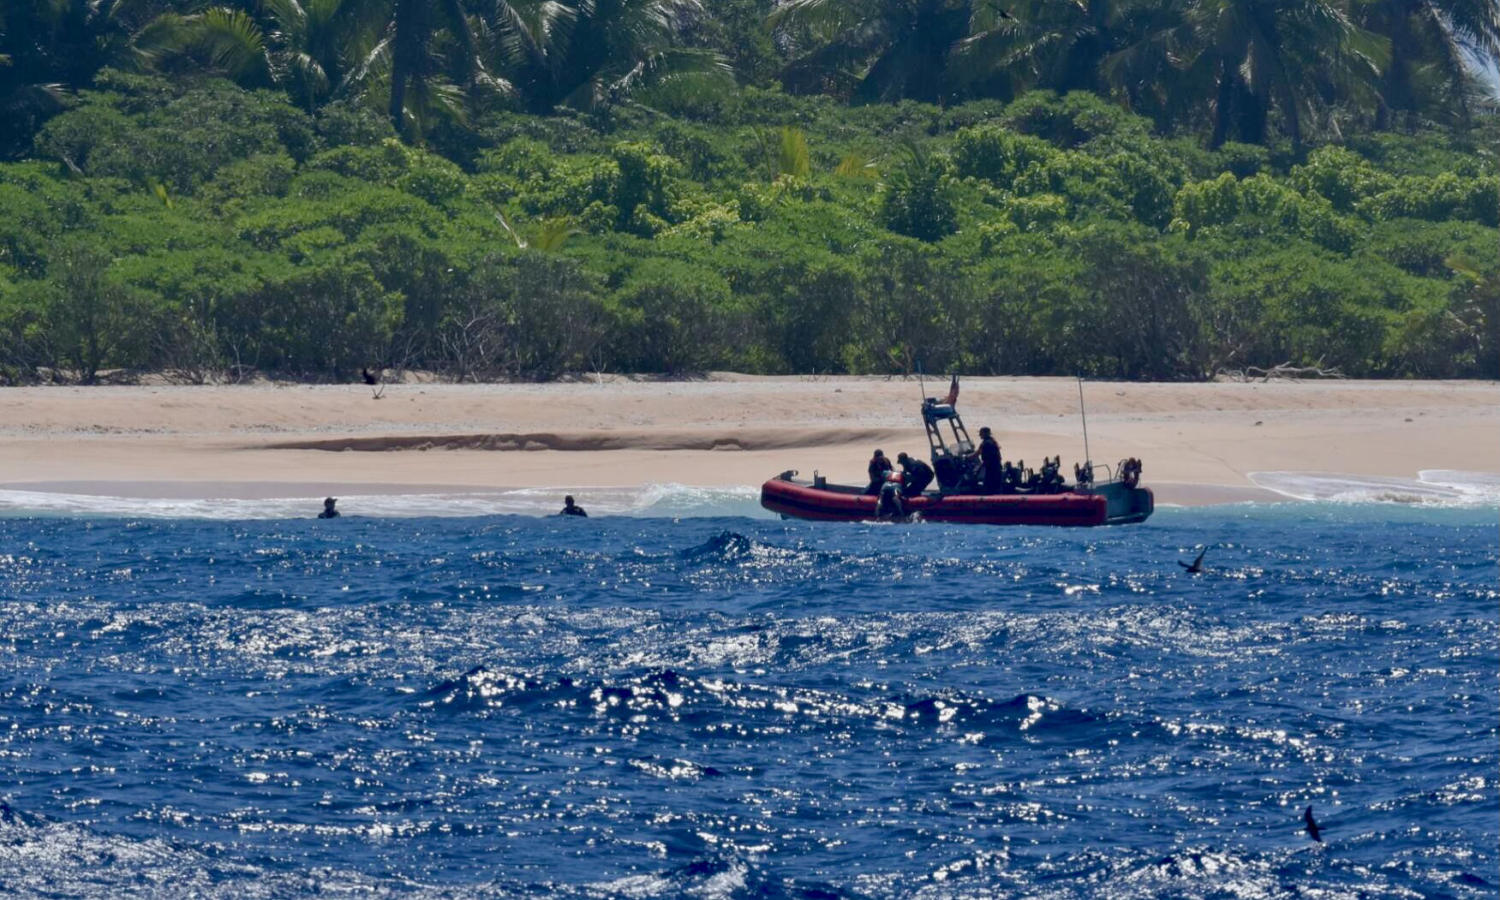 stranded sailors rescued from tiny pacific island after making 'help' sign with leaves